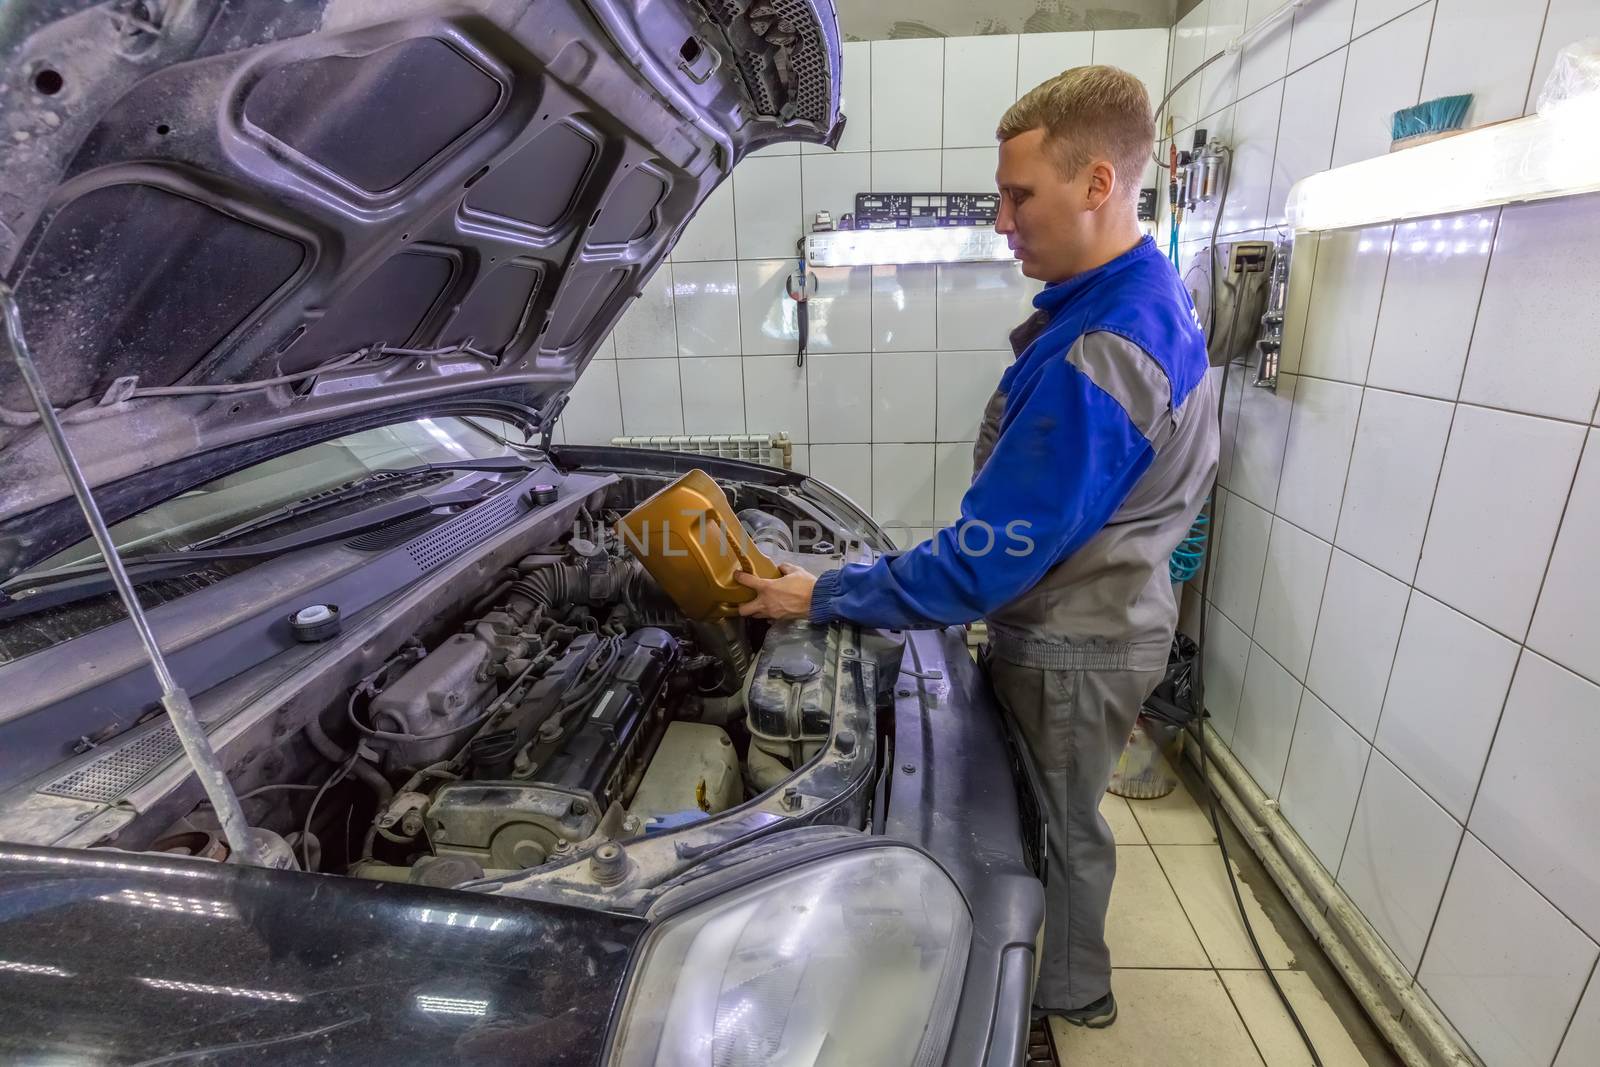 Car mechanic replacing and pouring oil into engine at car service station during regular check-up routine.